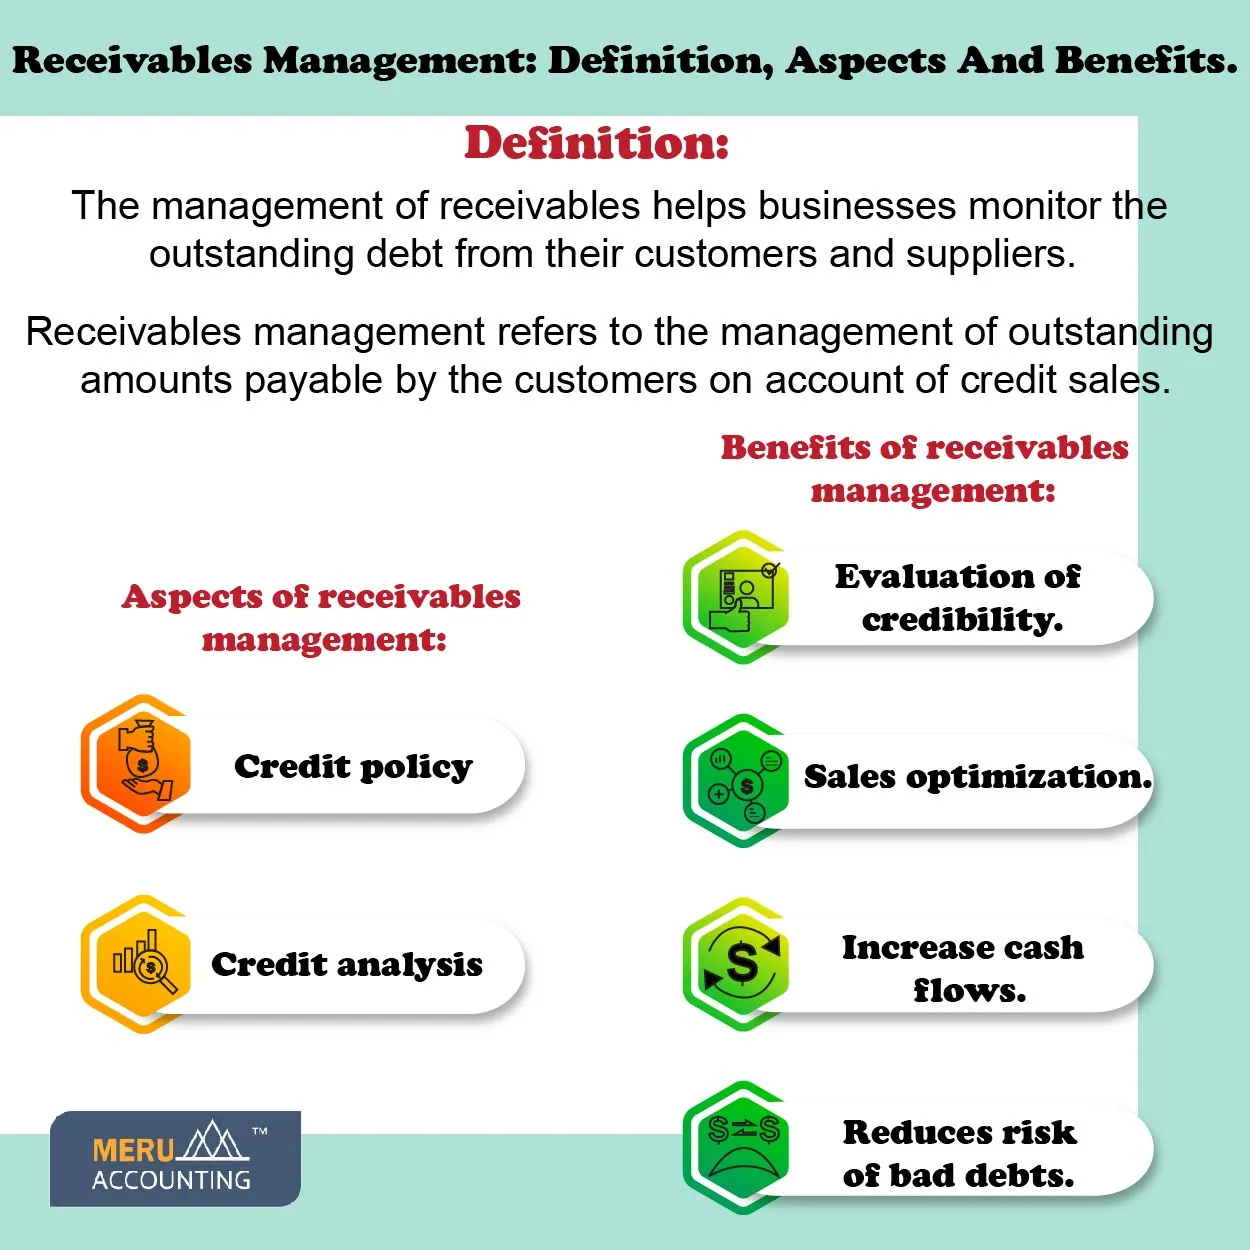 receivables management>
<br>

<p><br />
The following are the stages of credit analysis;</p>

<p> </p>

<ol>
	<li>Collection of information regarding credit history.</li>
	<li>Determining the accuracy of the collected information.</li>
	<li>Acceptance or rejection of the credit application.</li>
</ol>

<h2>Benefits of Receivable Management:</h2>

<ol>
	<li>Evaluation of the customer credibility: It assesses the borrowing limit of the customer and their repaying capacity. It evaluates the customer by credit rating and reduces the risk of bad debts.</li>
	<li>Sales optimization: Management of receivables helps the firm to optimize sales and increase sales volume. Businesses can attract potential customers by providing different credit facilities. Receivables management <a href=